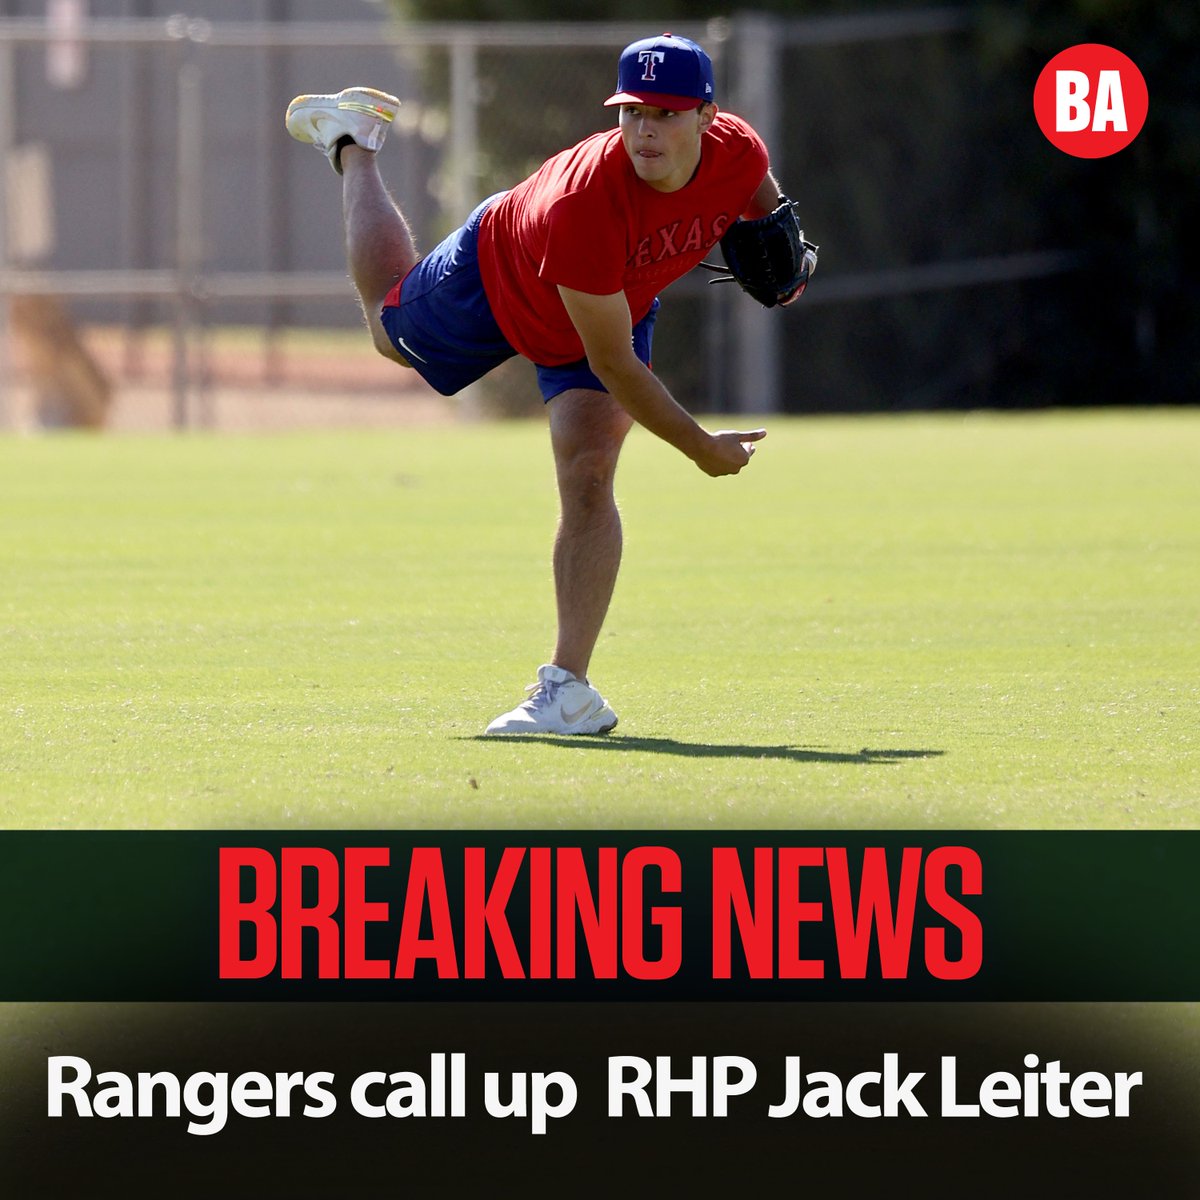 The @Rangers are calling up RHP Jack Leiter to make his MLB debut on Thursday